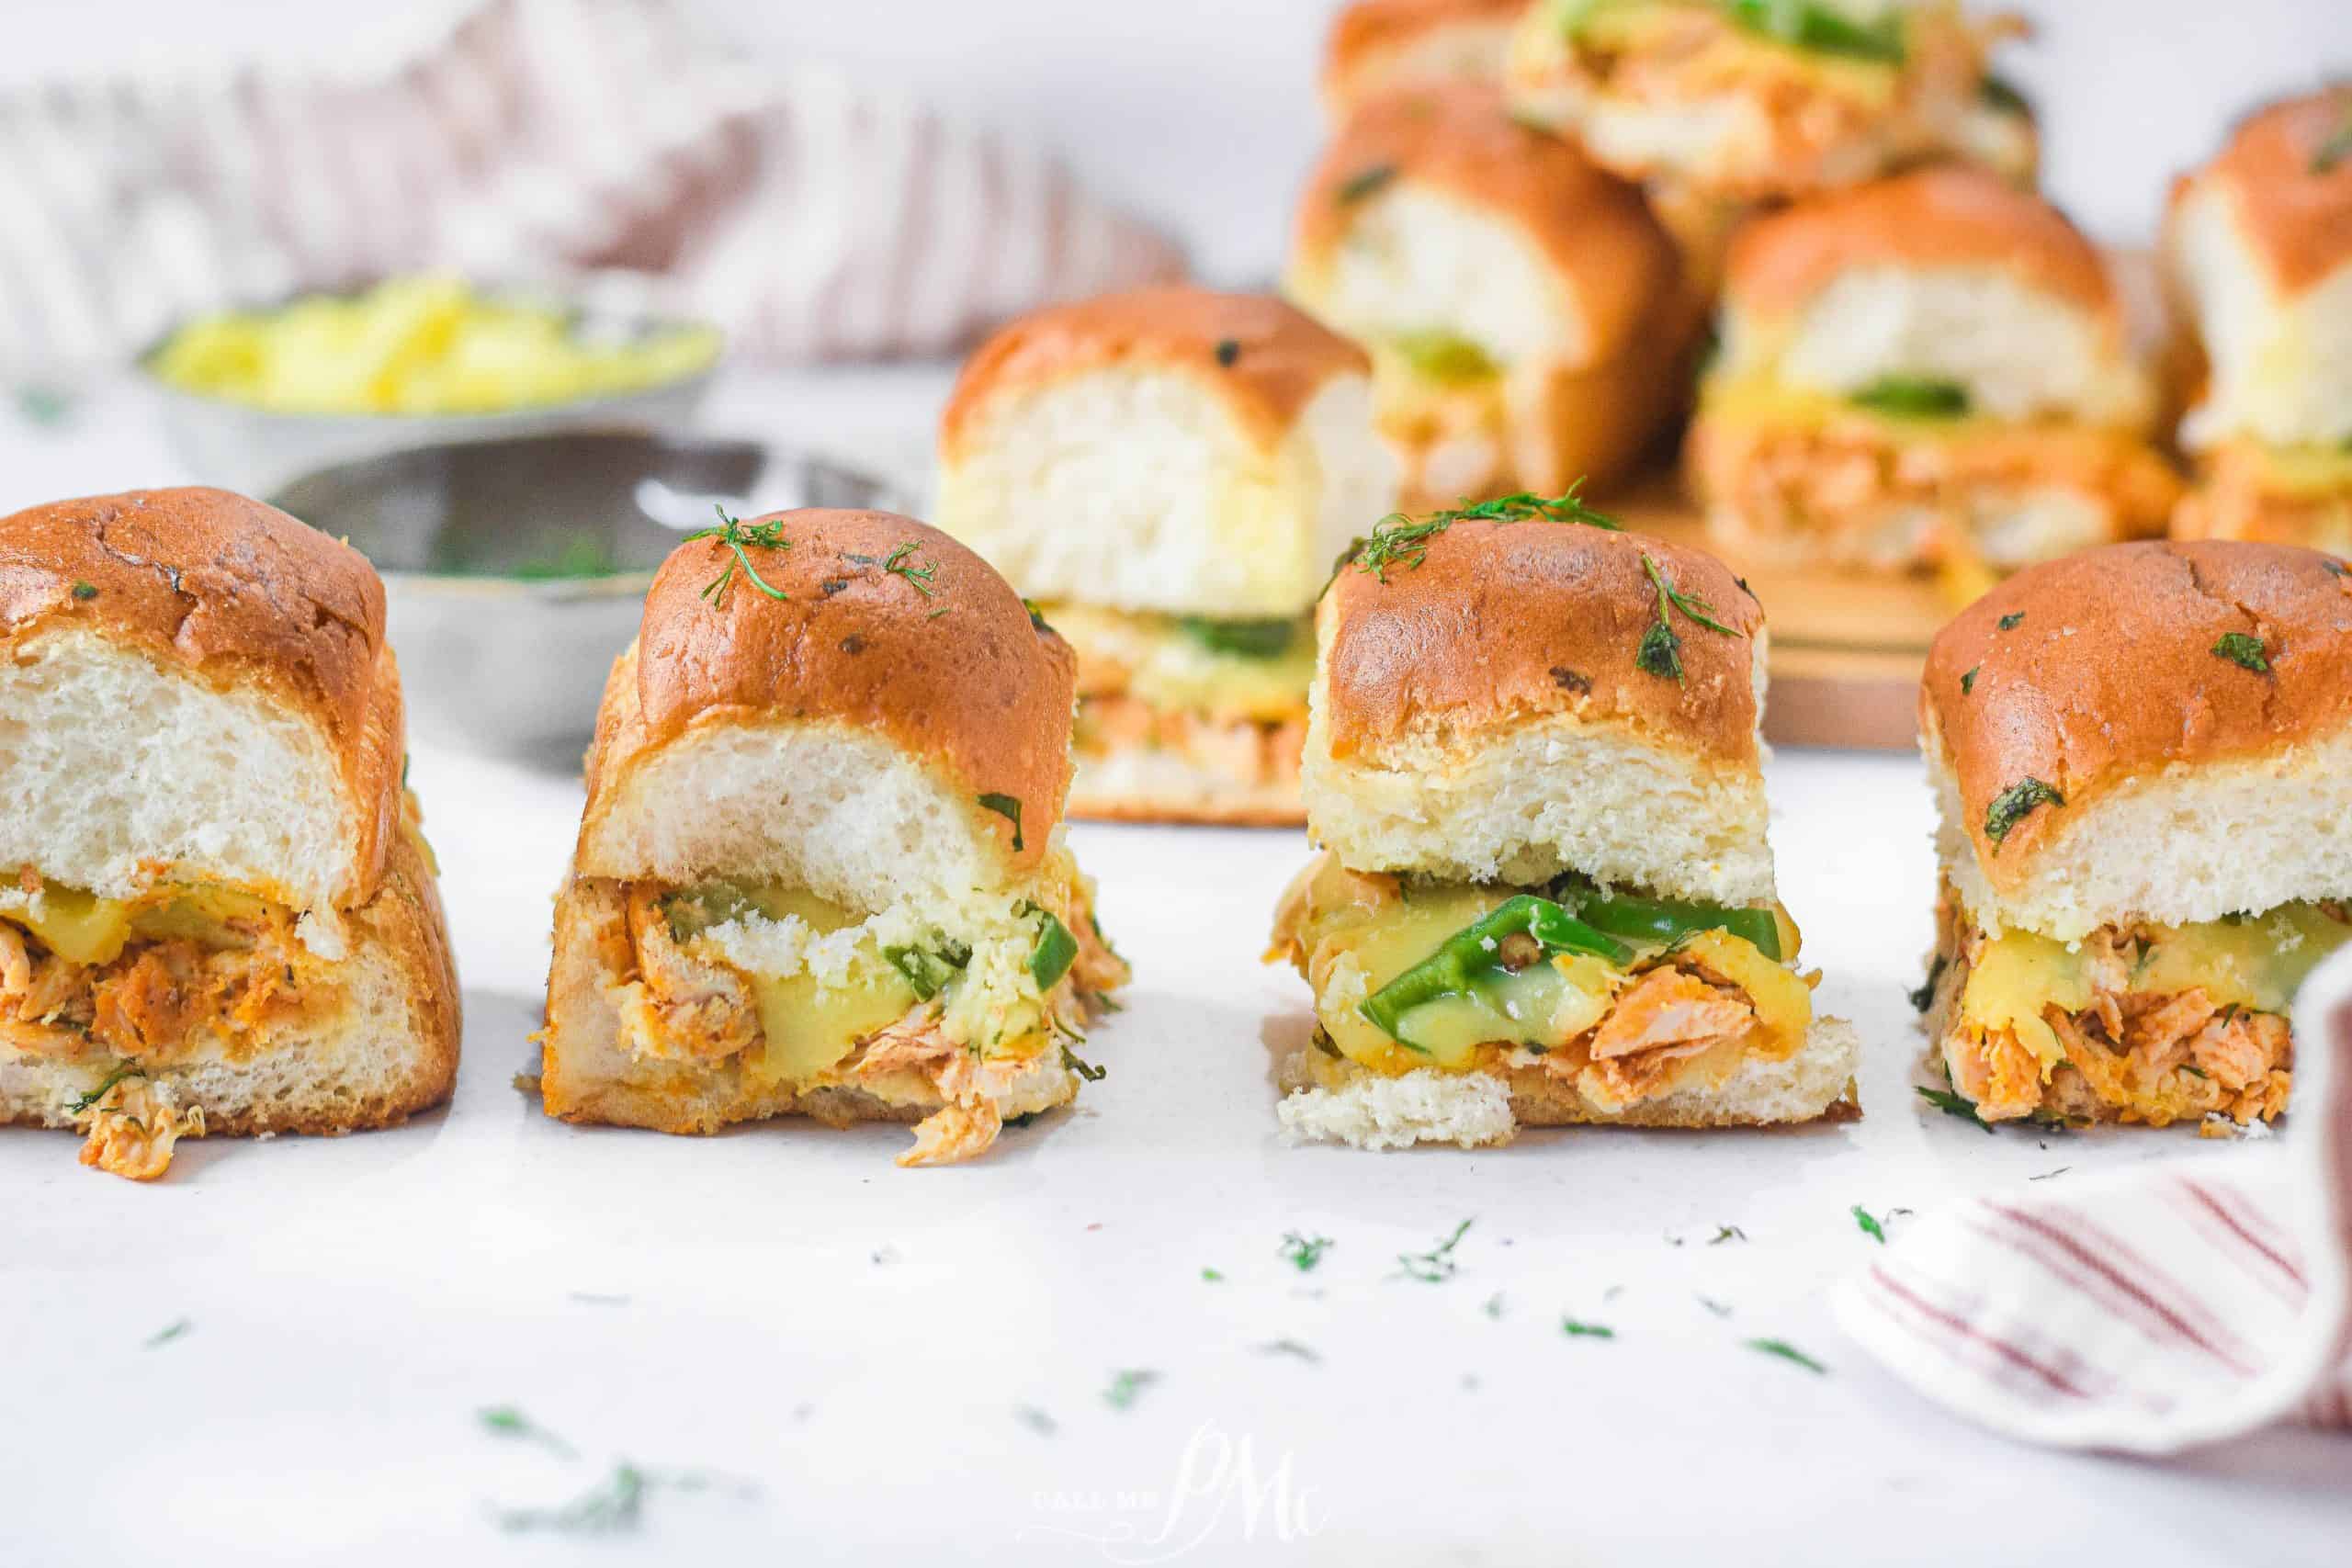 Small chicken sandwiches with cheese on a table.